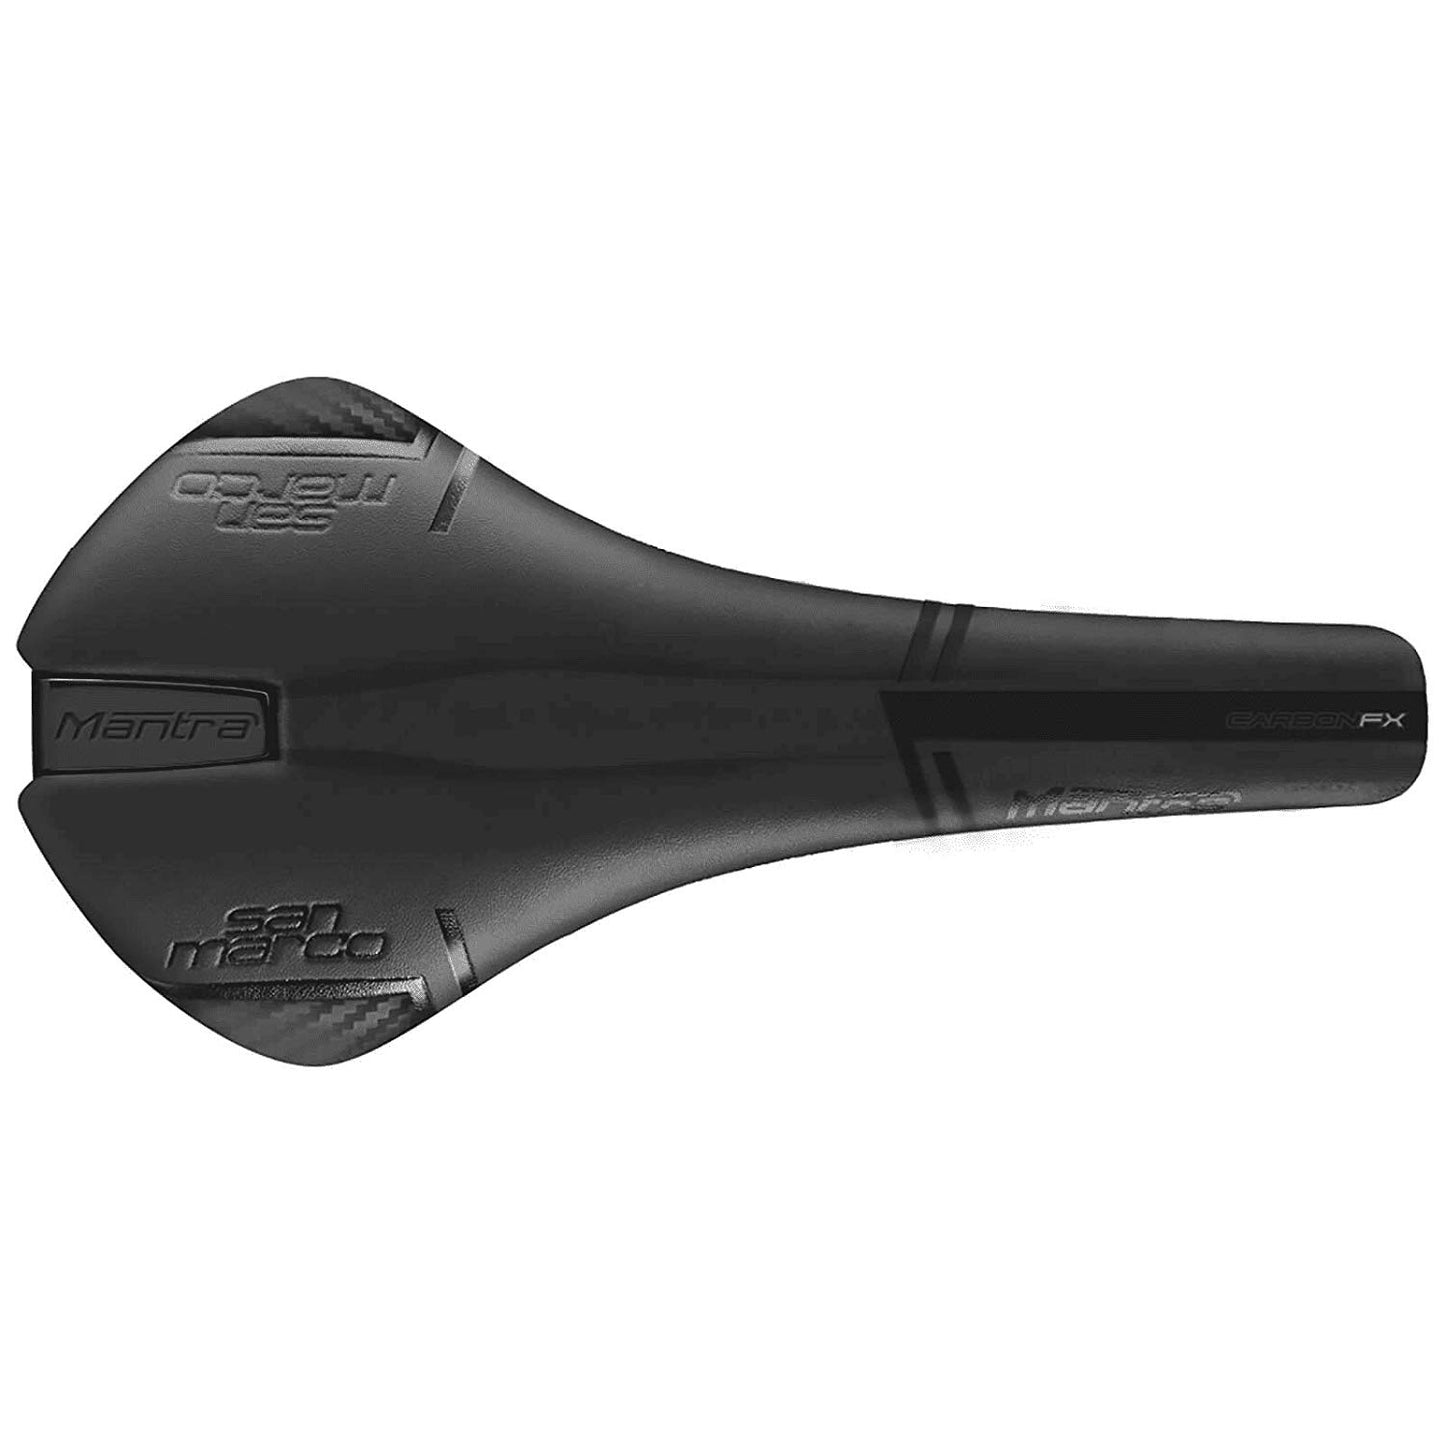 NEW Selle San Marco Mantra Racing Saddle Full Fit Narrow Xsilite Black Road S1